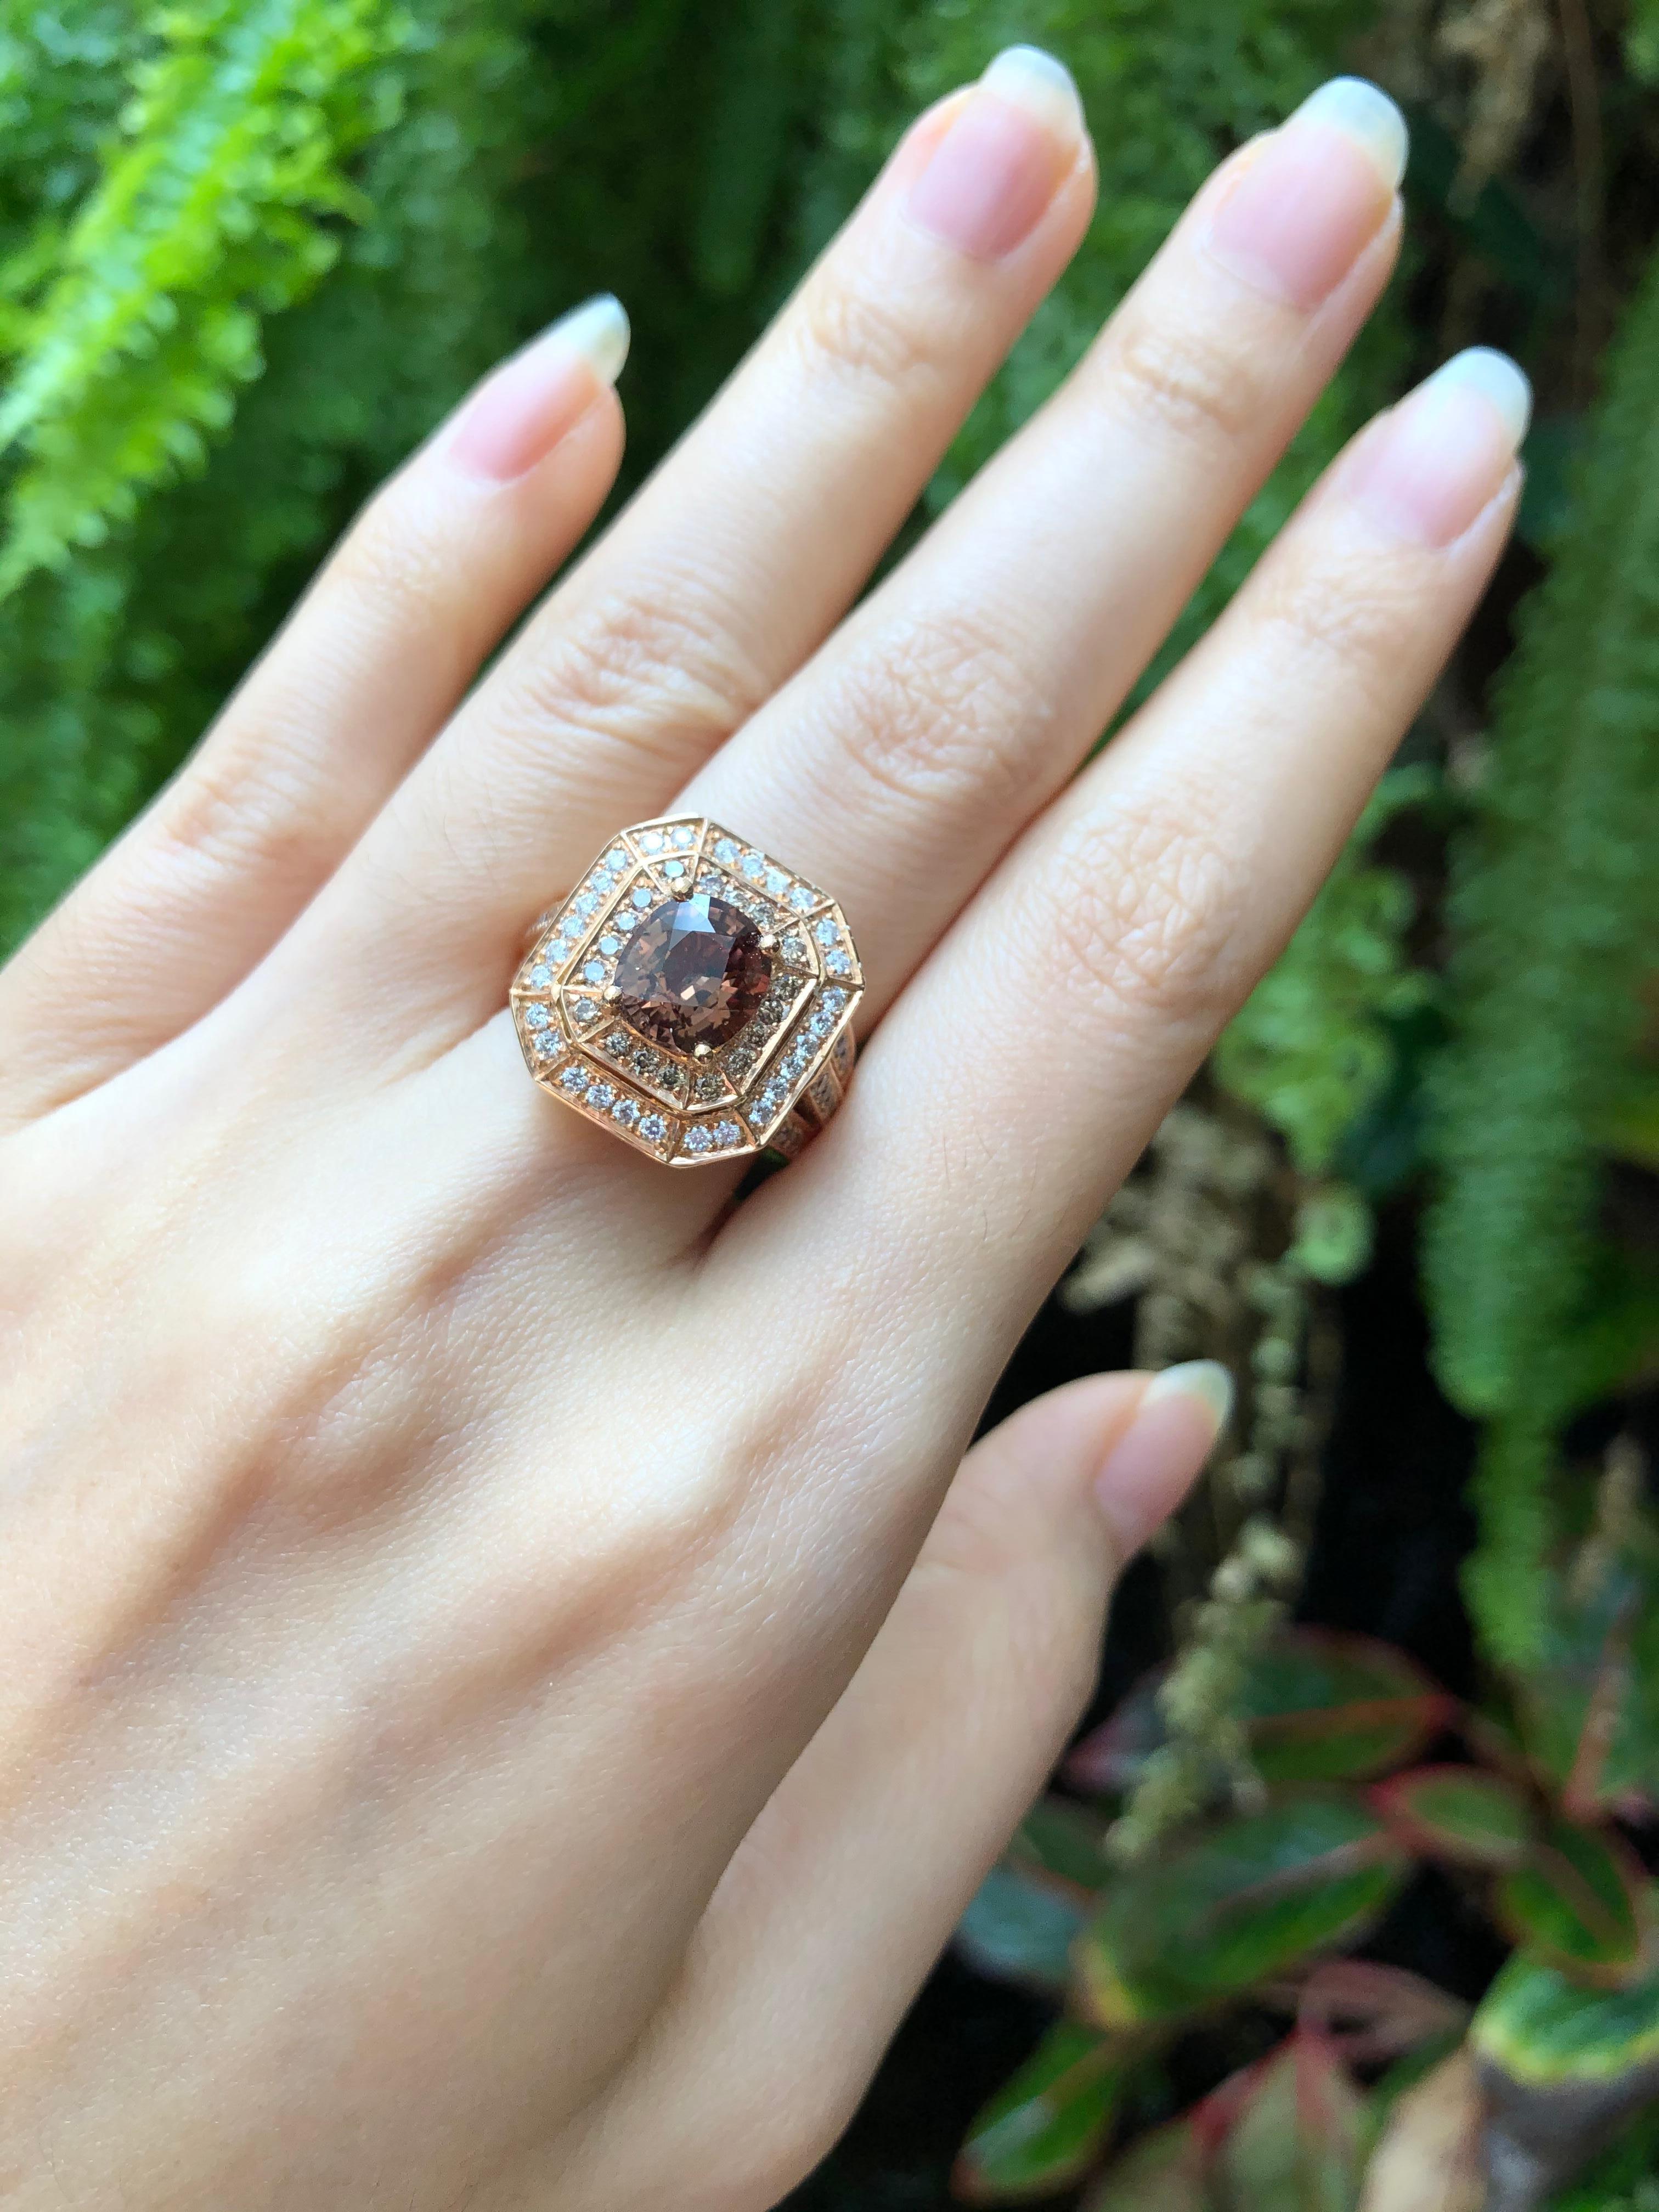 Brown Sapphire 2.57 carats with Brown Diamond 0.60 carat and Diamond 0.31 carat Ring set in 18 Karat Rose Gold Settings

Width:  1.6 cm 
Length: 1.8 cm
Ring Size: 52
Total Weight: 12.12 grams

